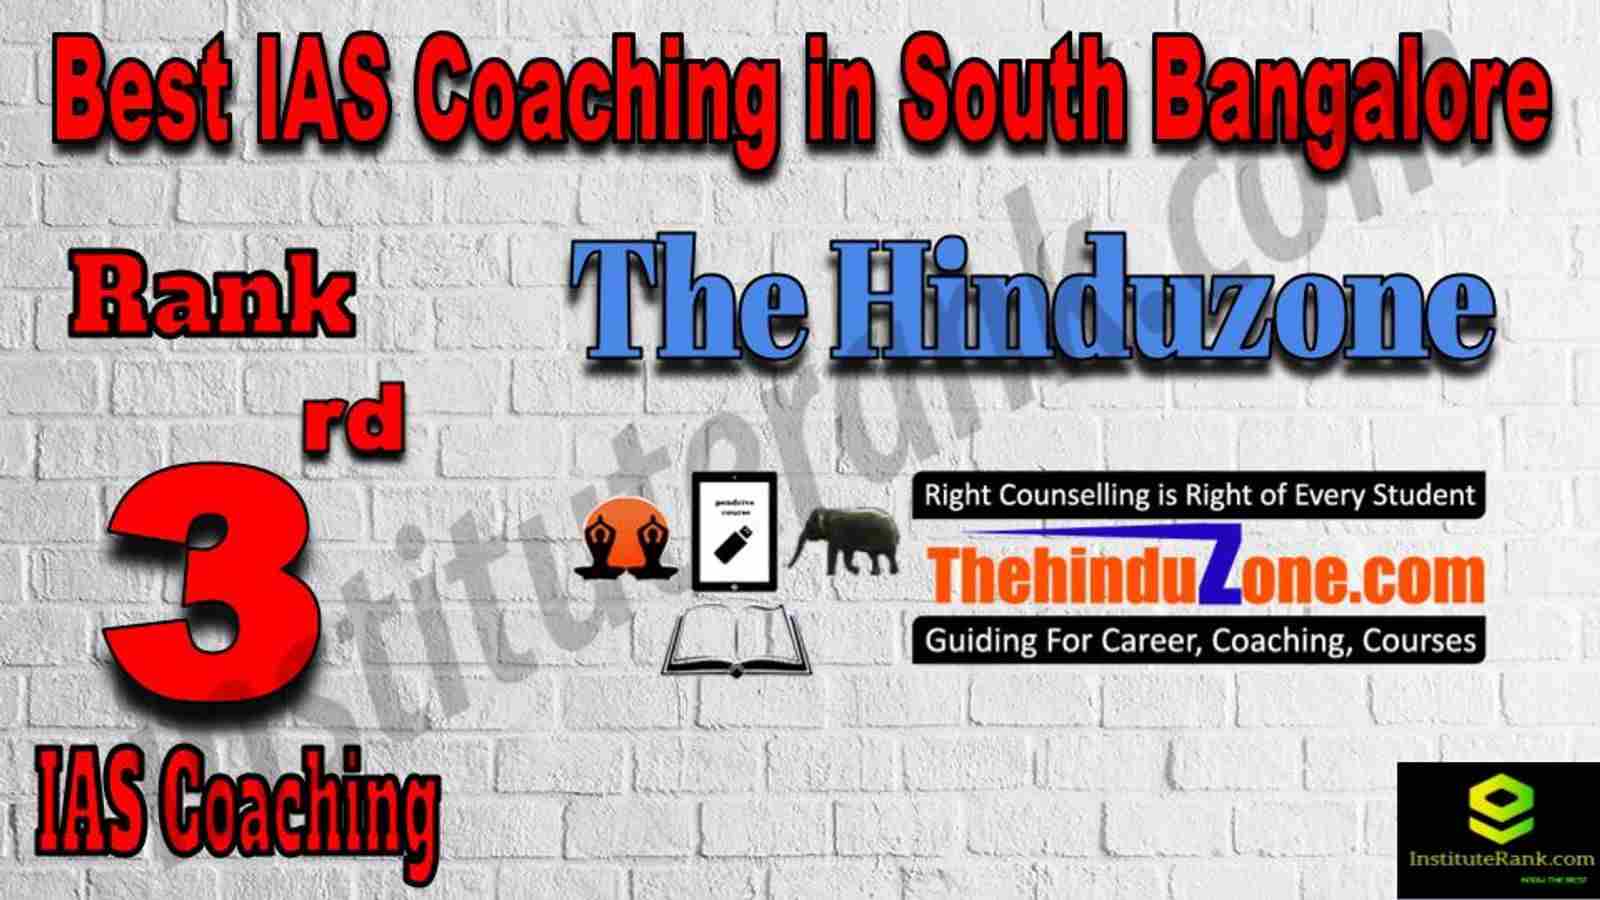 3rd Best IAS Coaching in South Bangalore